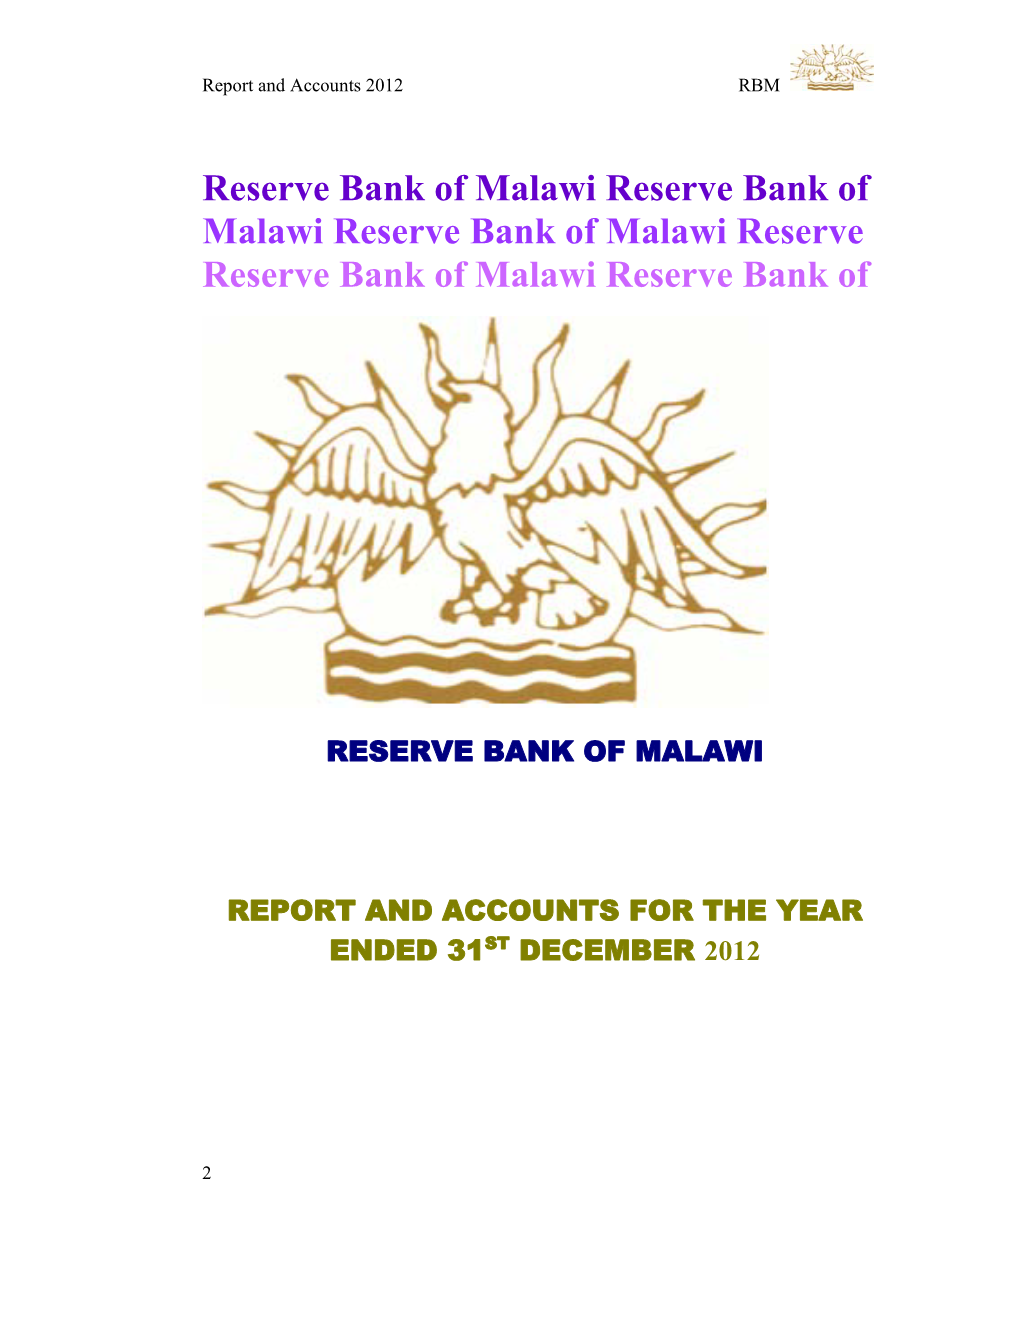 Reserve Bank of Malawi Report and Accounts for the Year Ended 31